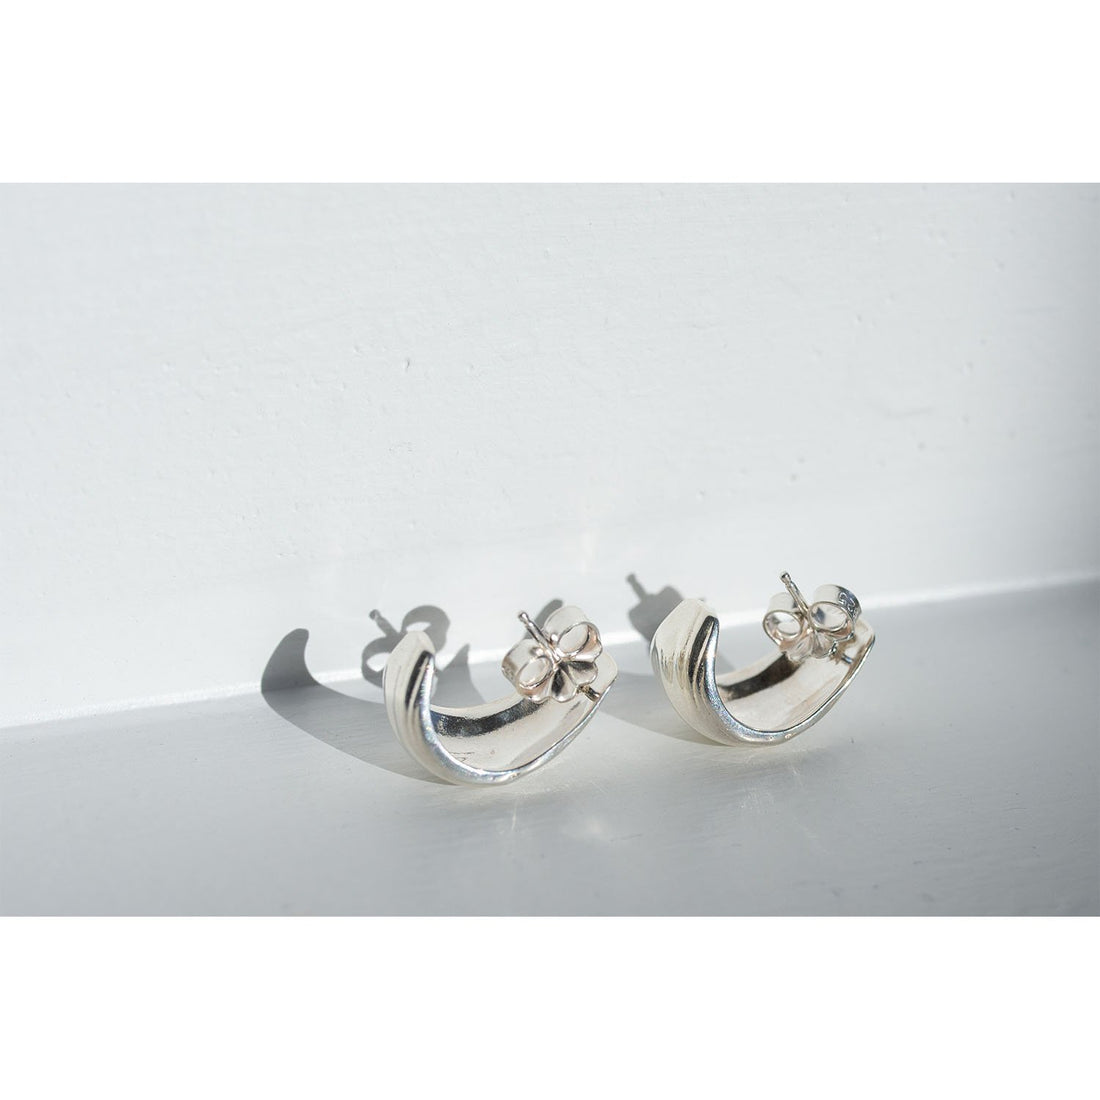 Leigh Miller Mini Piana Hoops in Sterling Silver